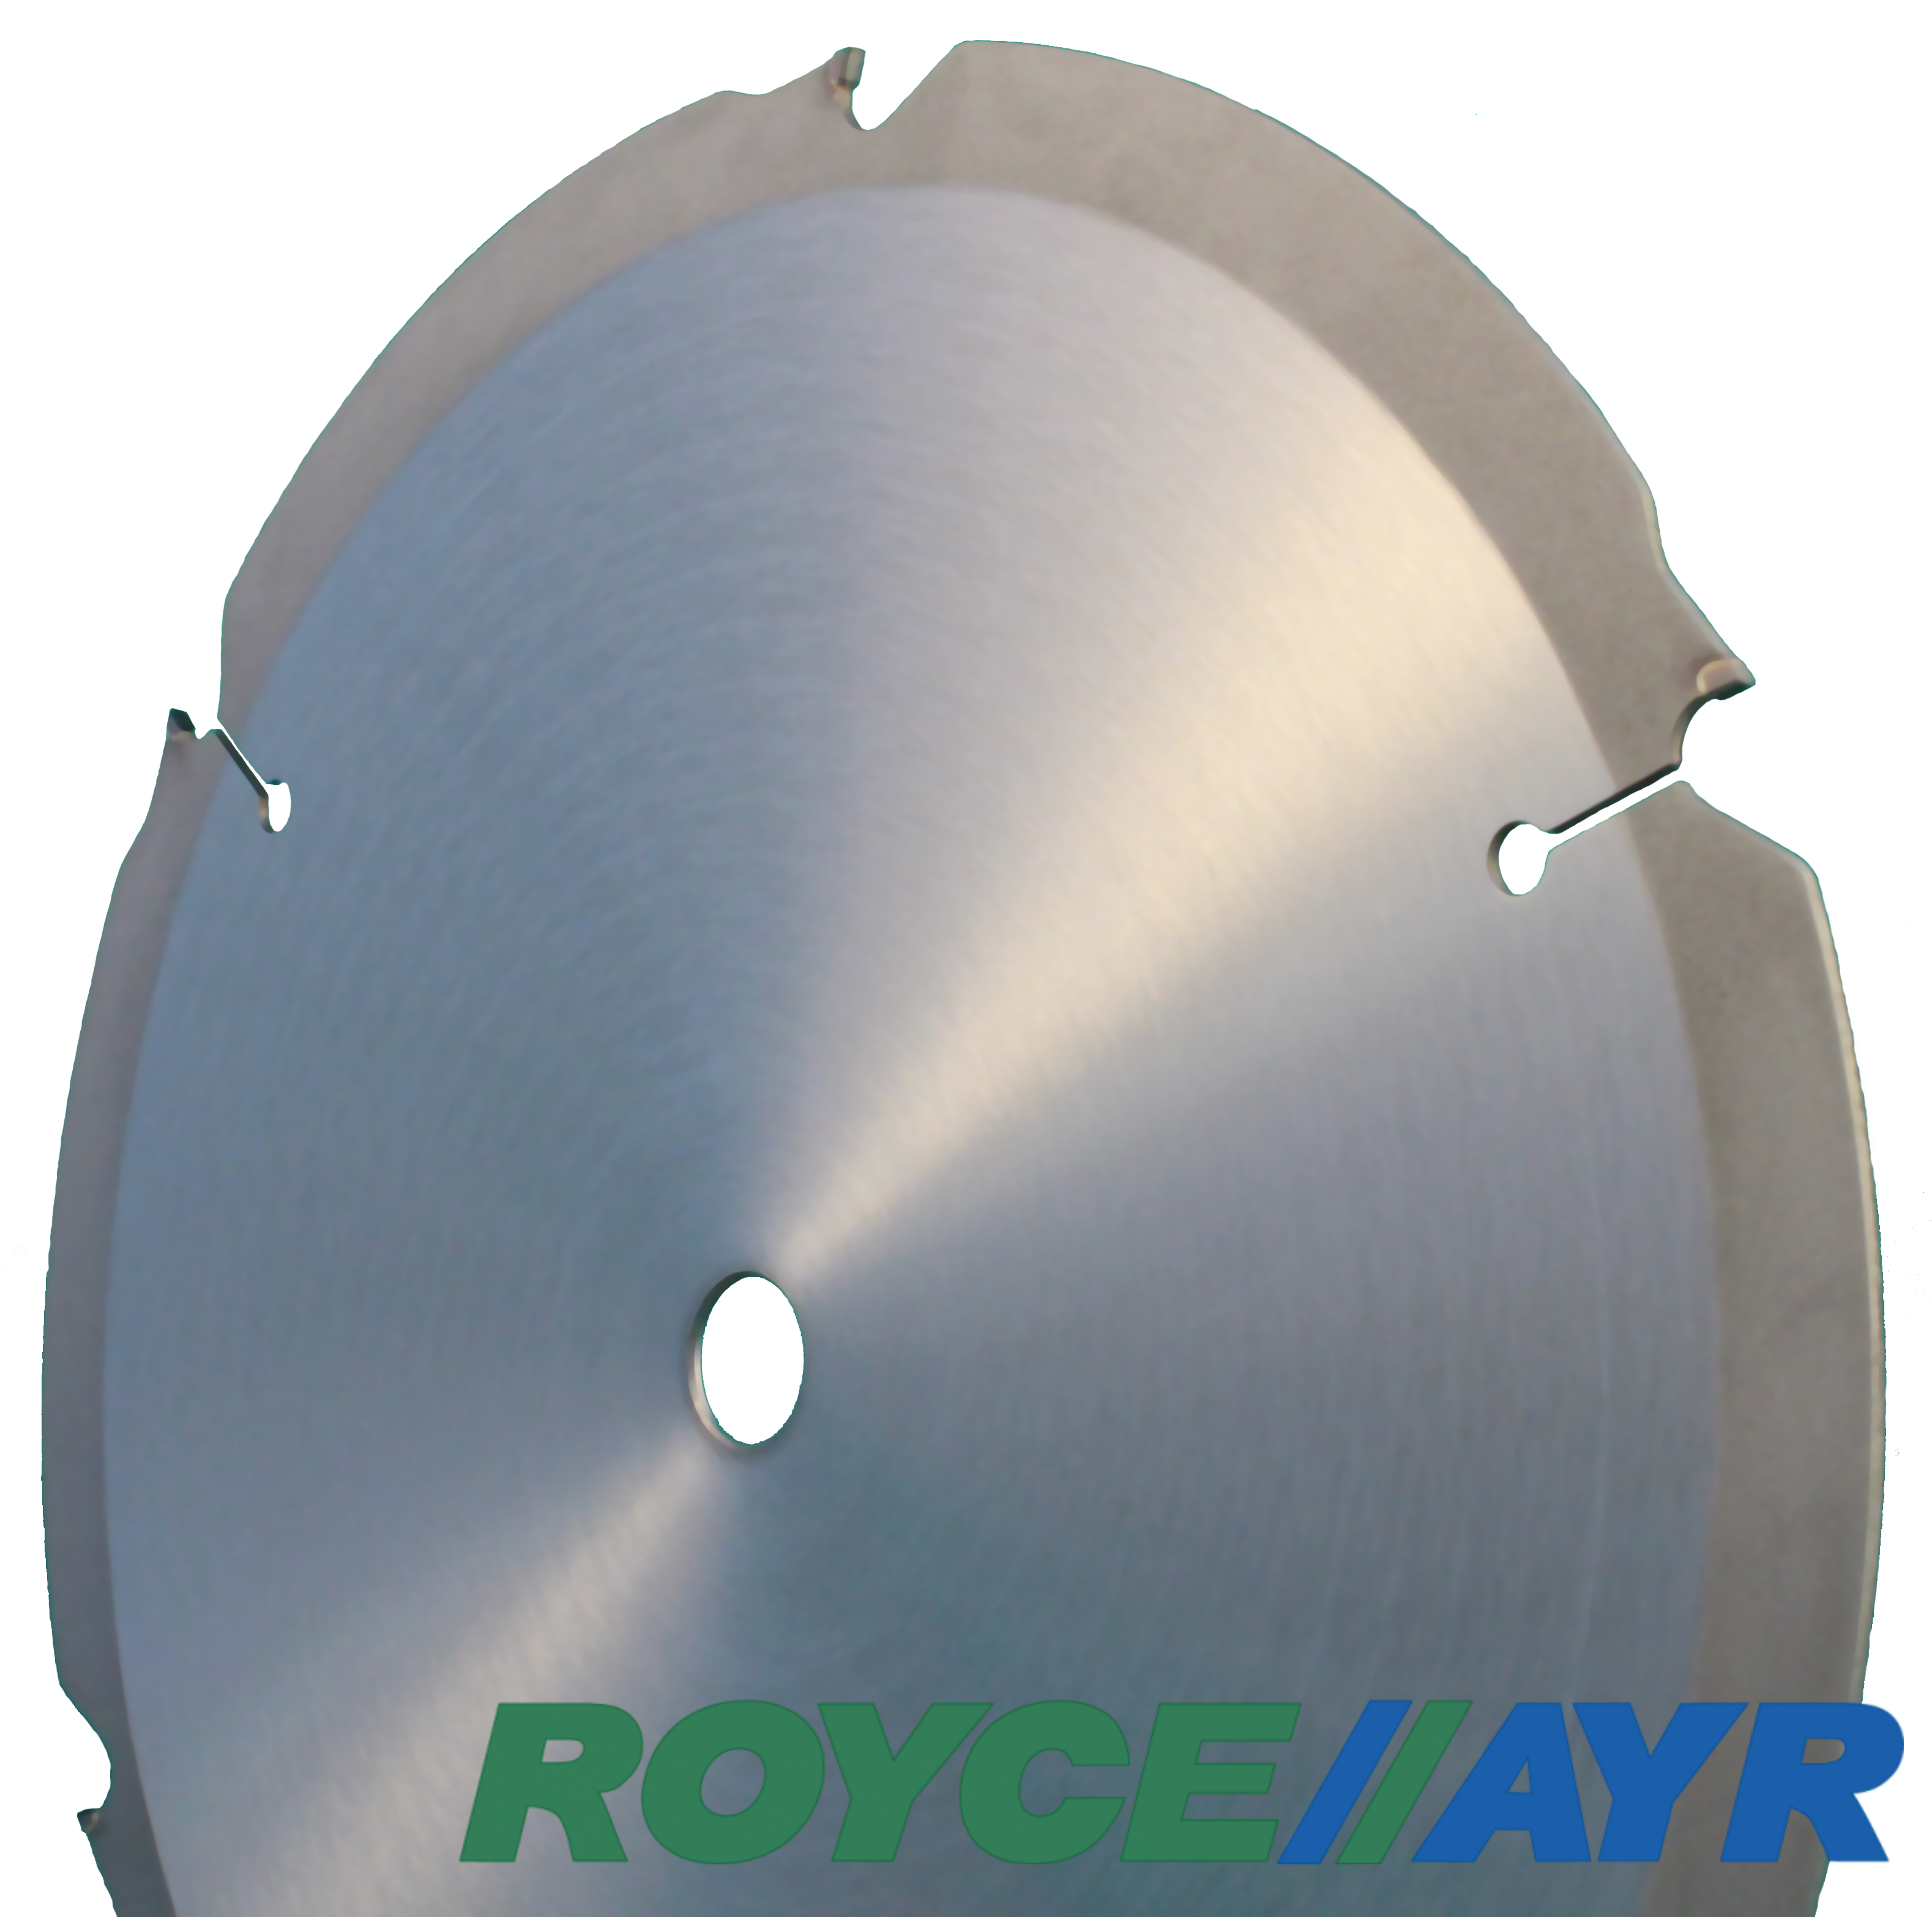 Royce//Ayr - S50 Cement Board | Product